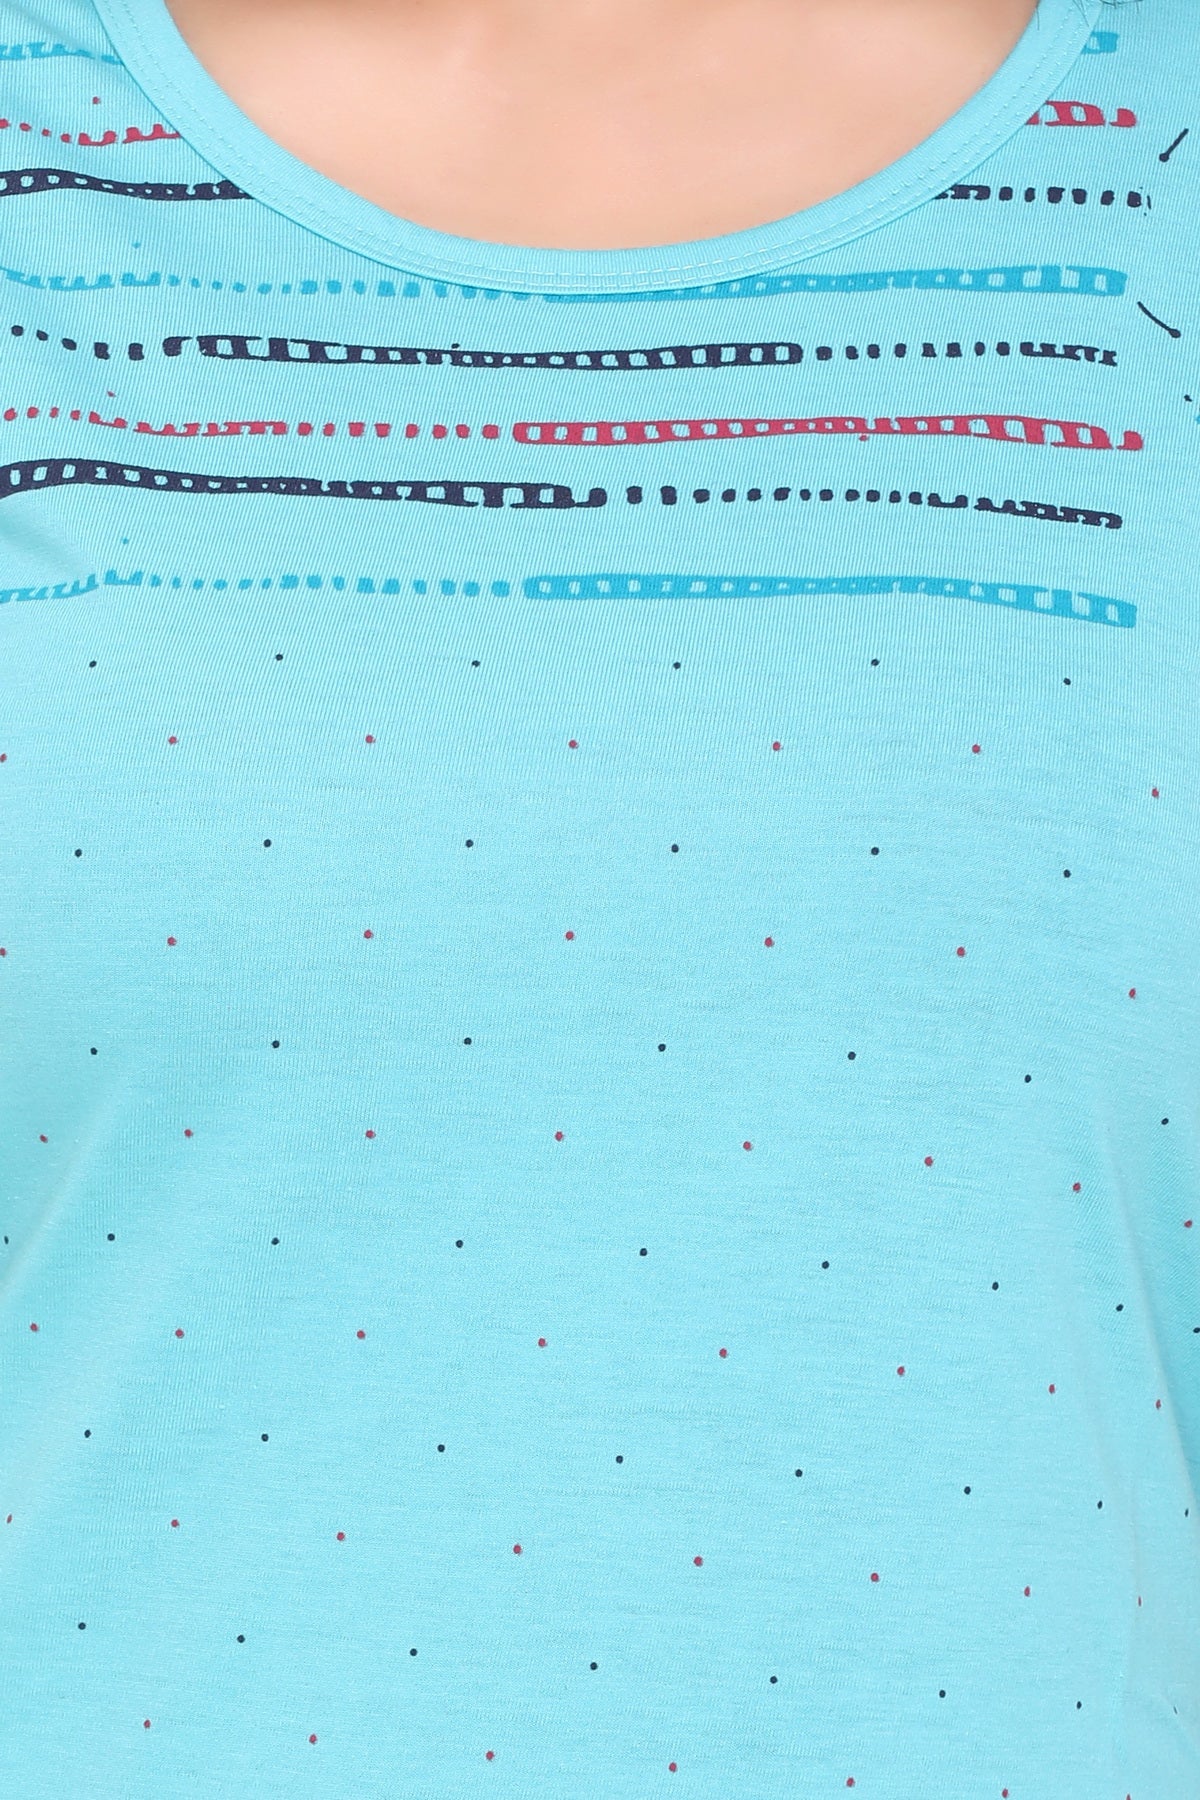 Comfortable Cotton Printed Long T-shirts For Women Half Sleeve - Aqua At Online